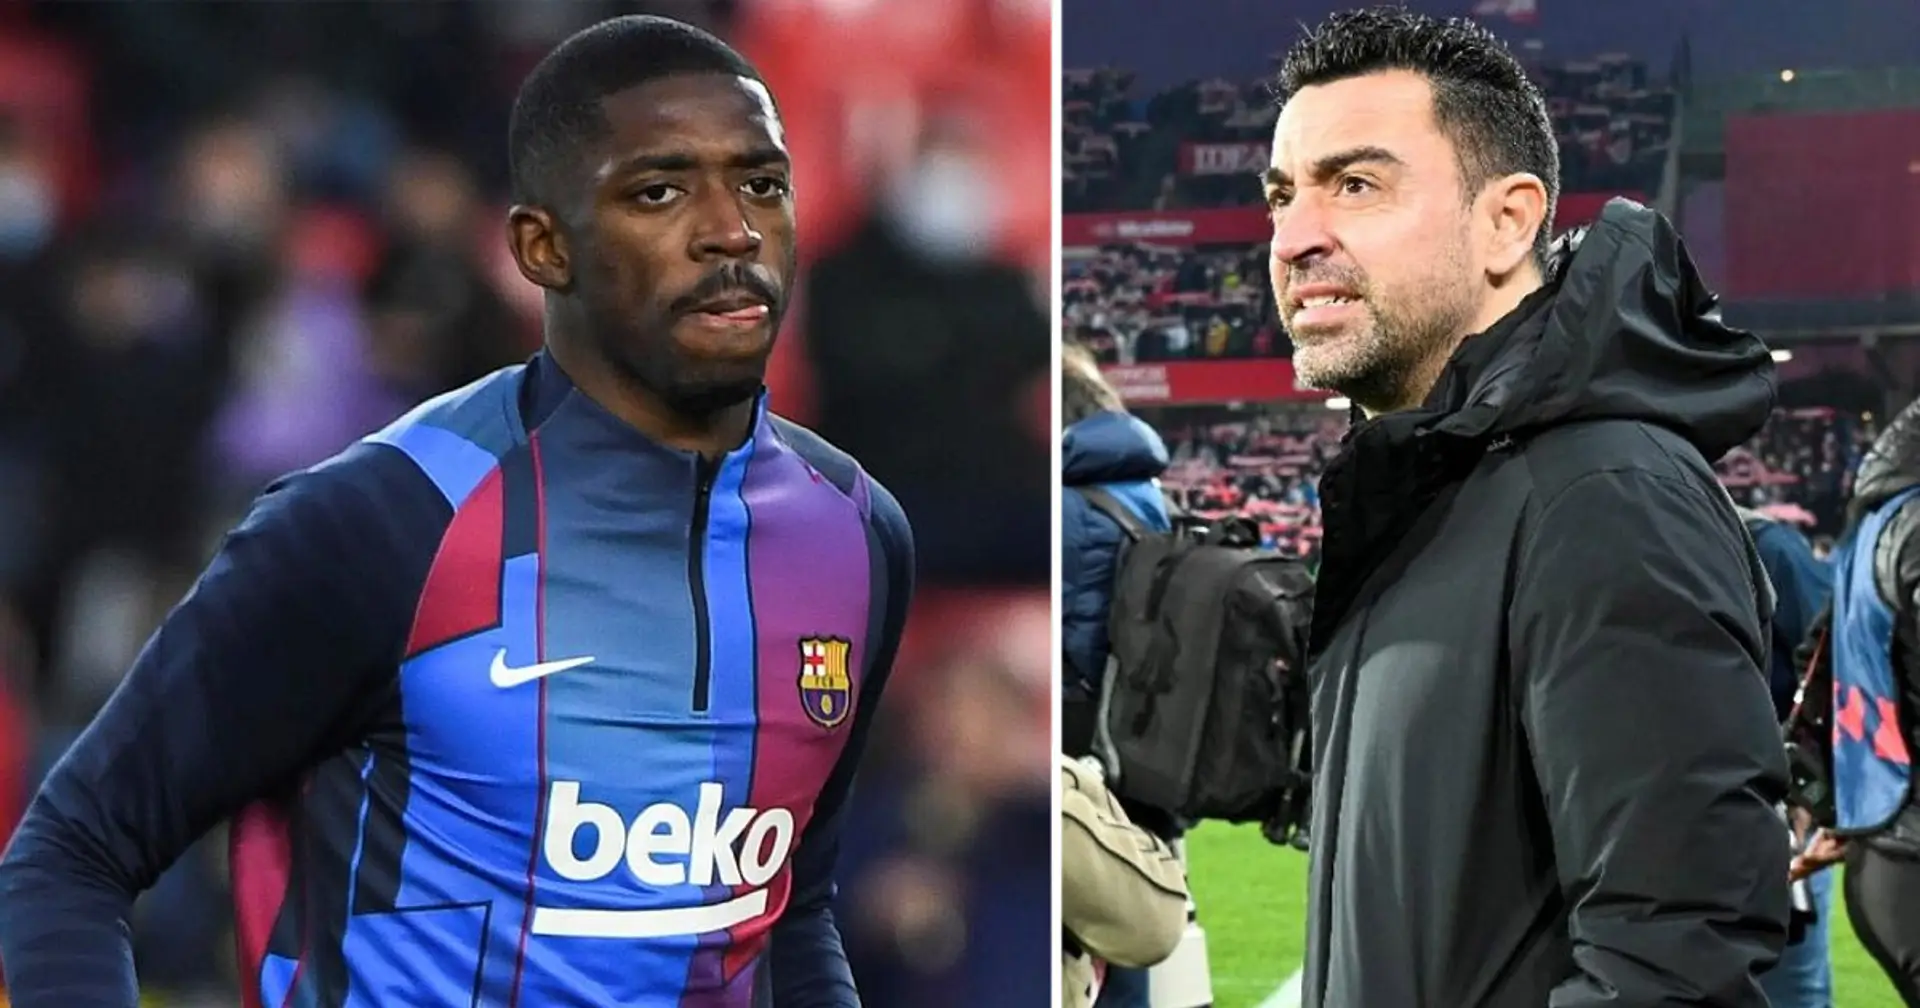 Xavi won't send Dembele to the stands but still prefers selling him (reliability: 4 stars)